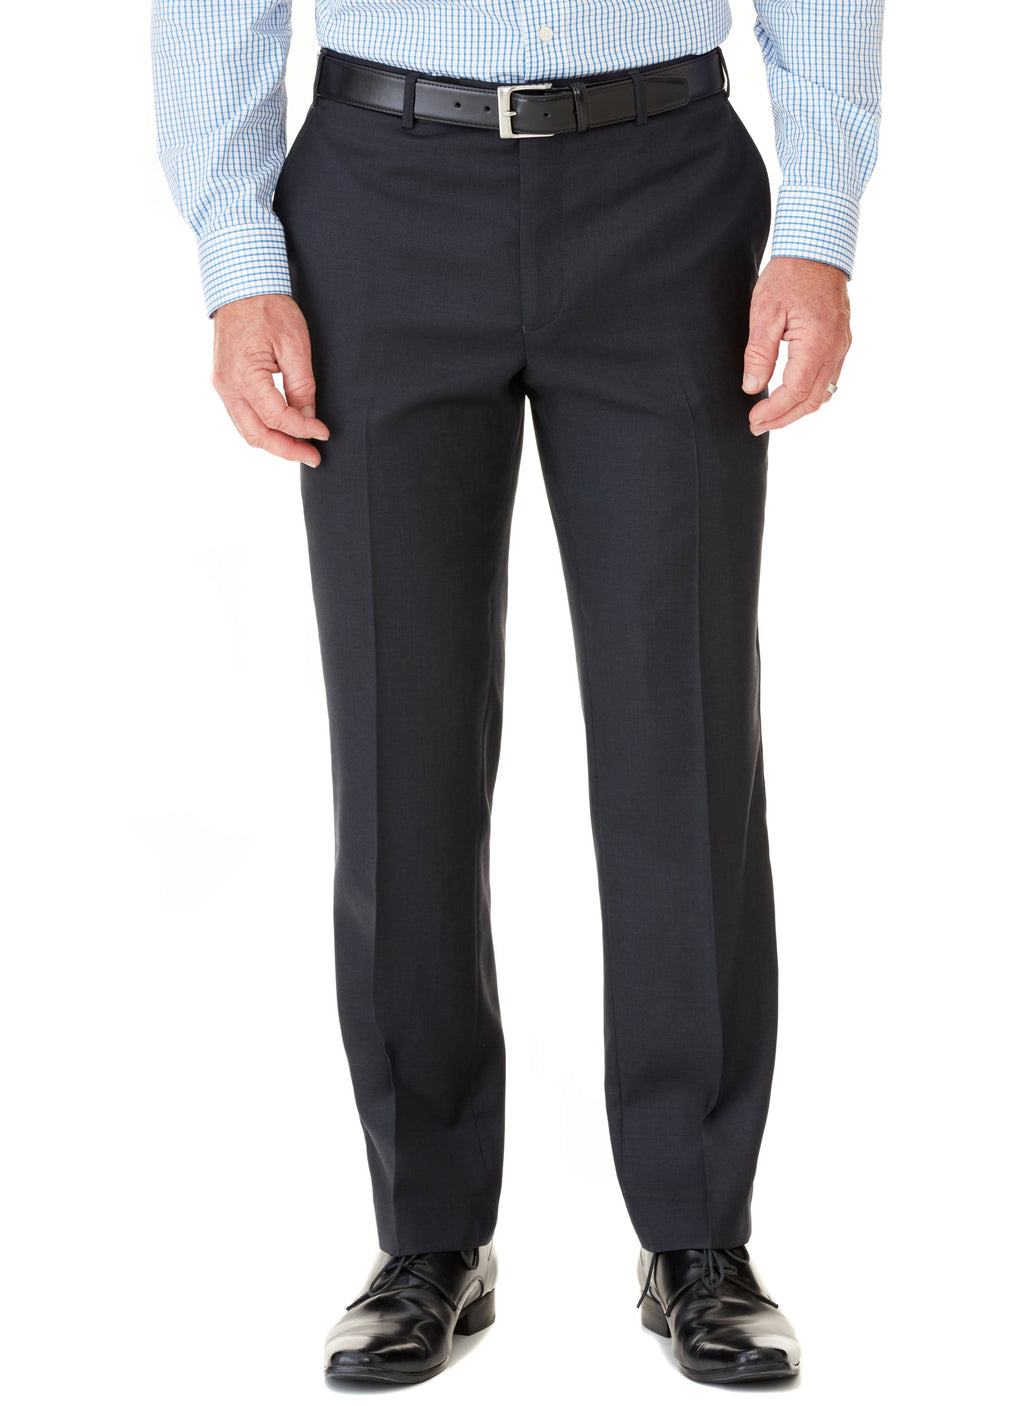 EDENHOPE SUPER 120's CHARCOAL PURE WOOL SUIT